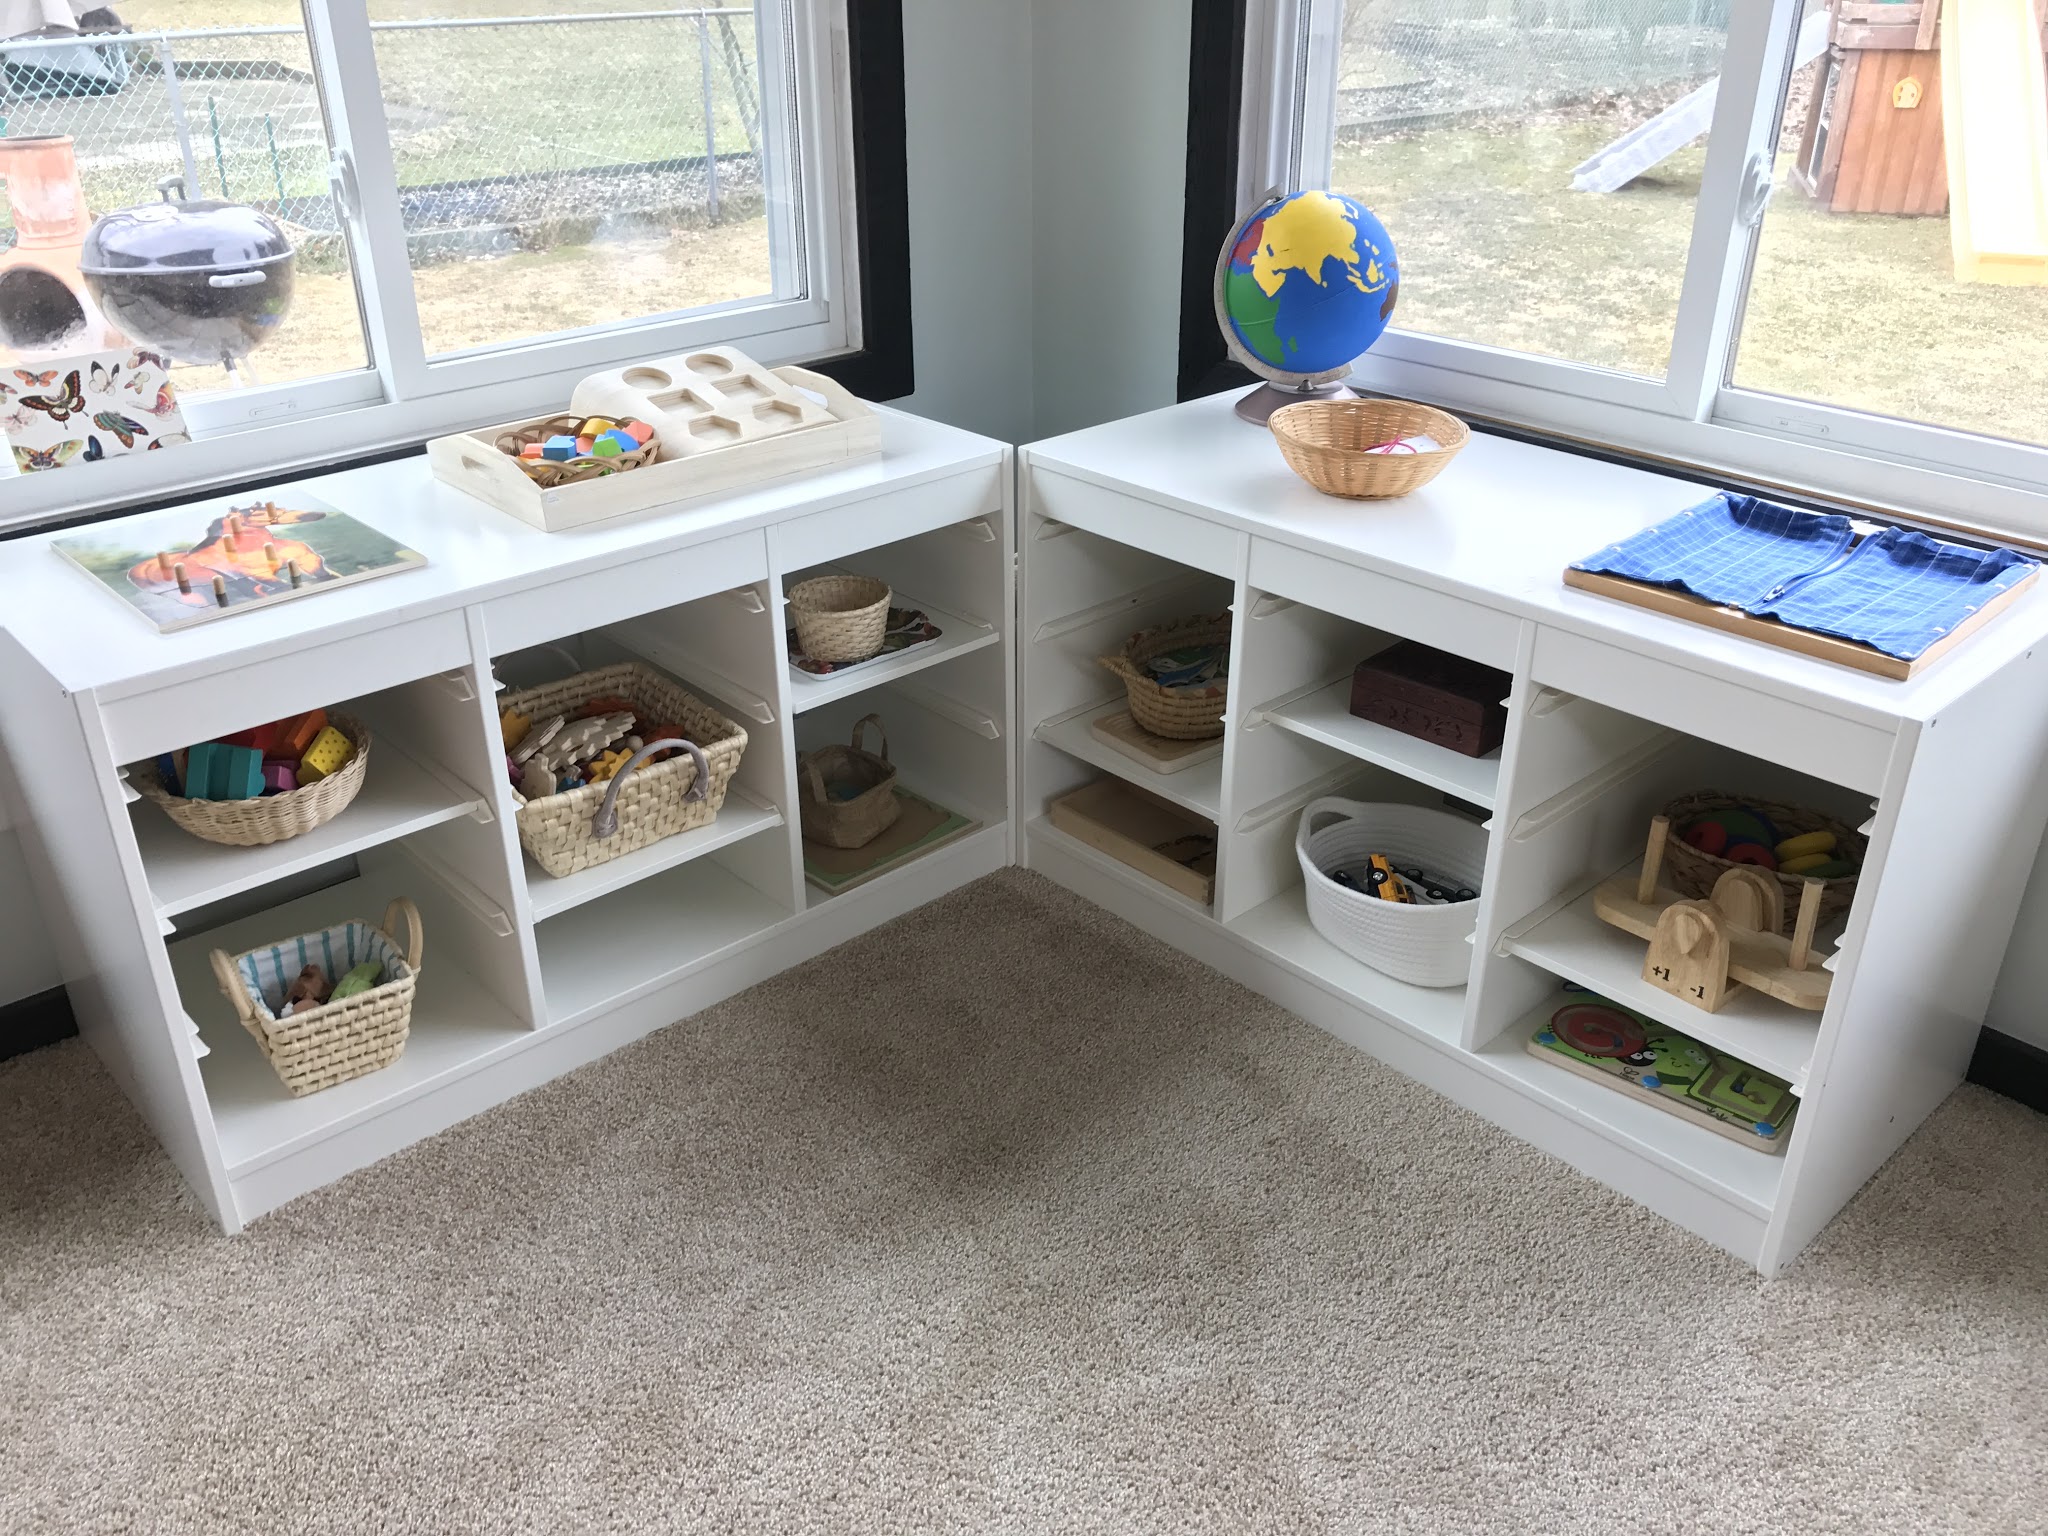 What is the problem with too many toys? From a Montessori perspective too many toys can interrupt a child's sense of order, create stress and is downright overwhelming. Here are some reasons it's a problem to have too many toys.